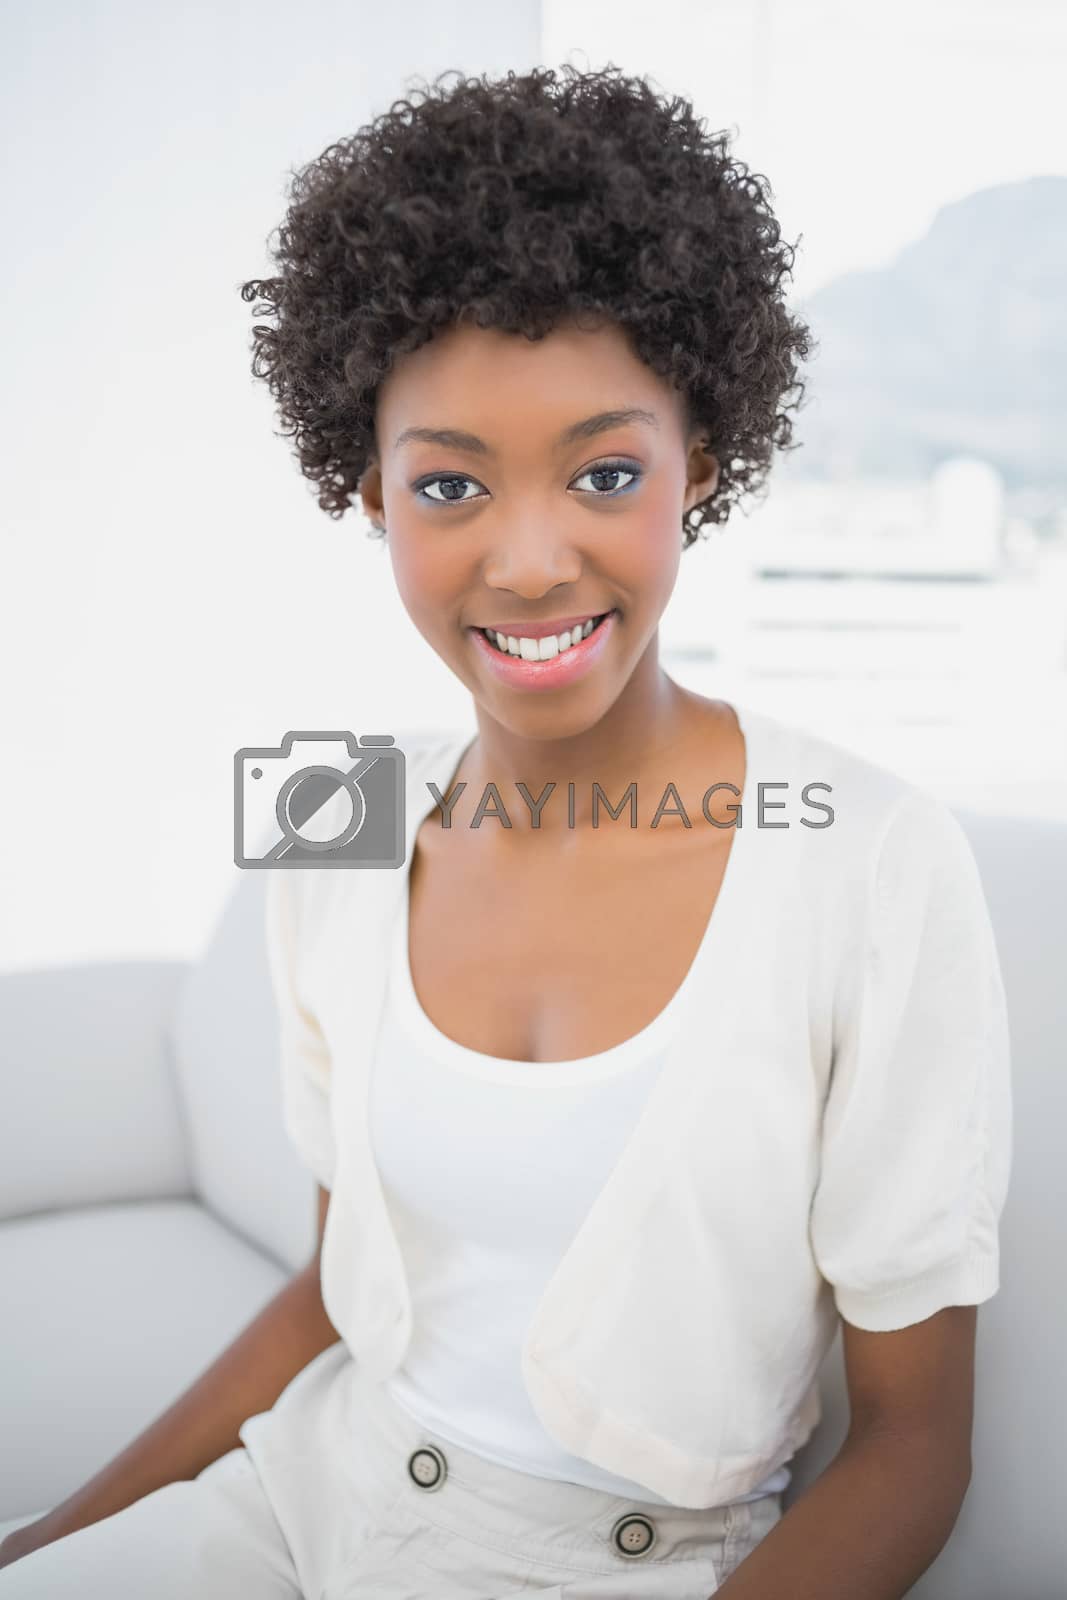 Royalty free image of Smiling pretty brunette sitting on cosy sofa by Wavebreakmedia